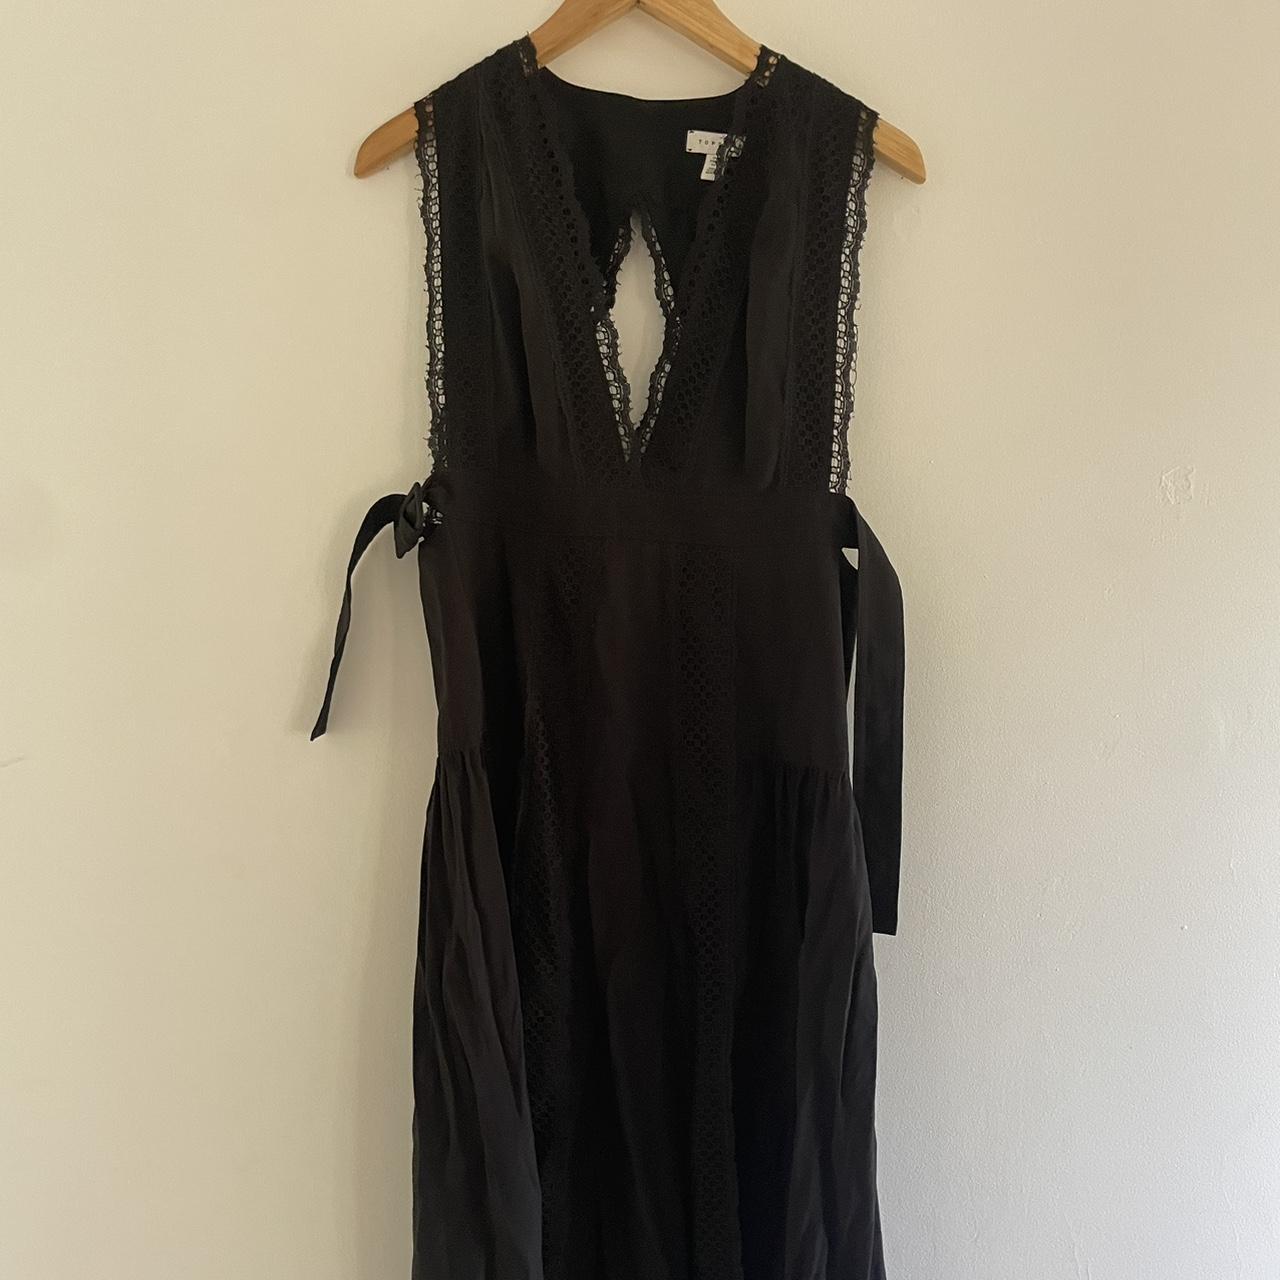 Cottage/goth core dress for my girlies. Black lace... - Depop